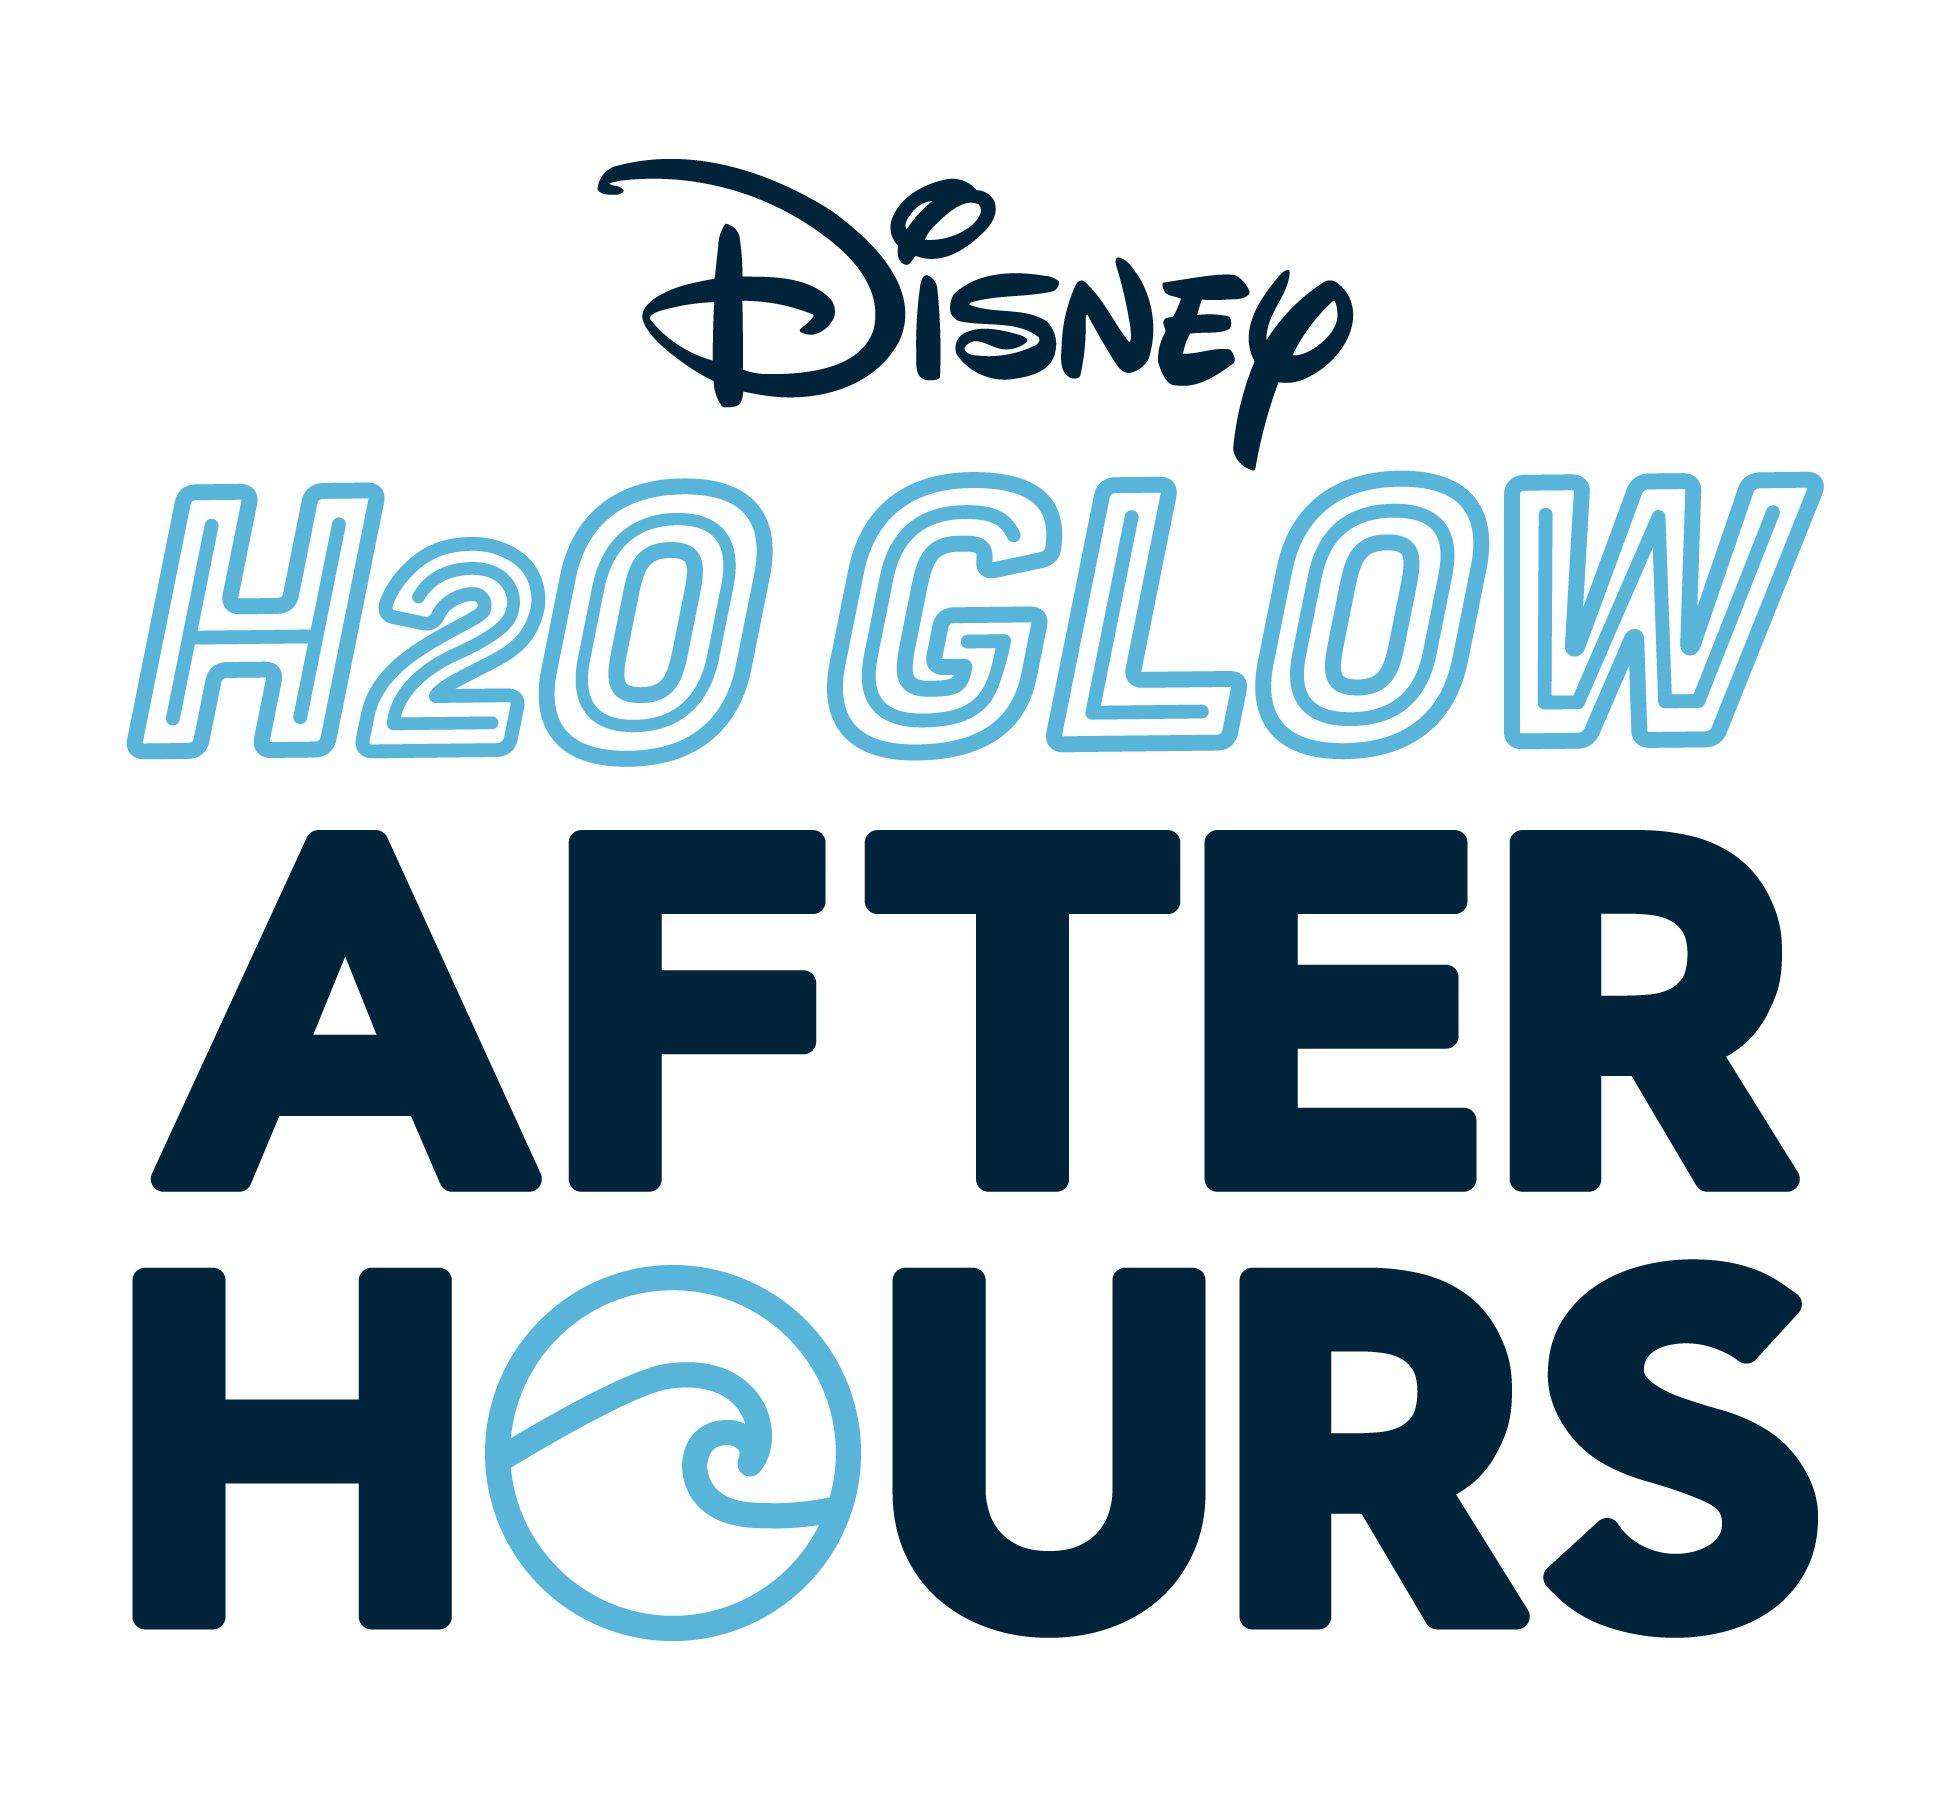 Disney H2O Glow After Hours at Disney's Typhoon Lagoon